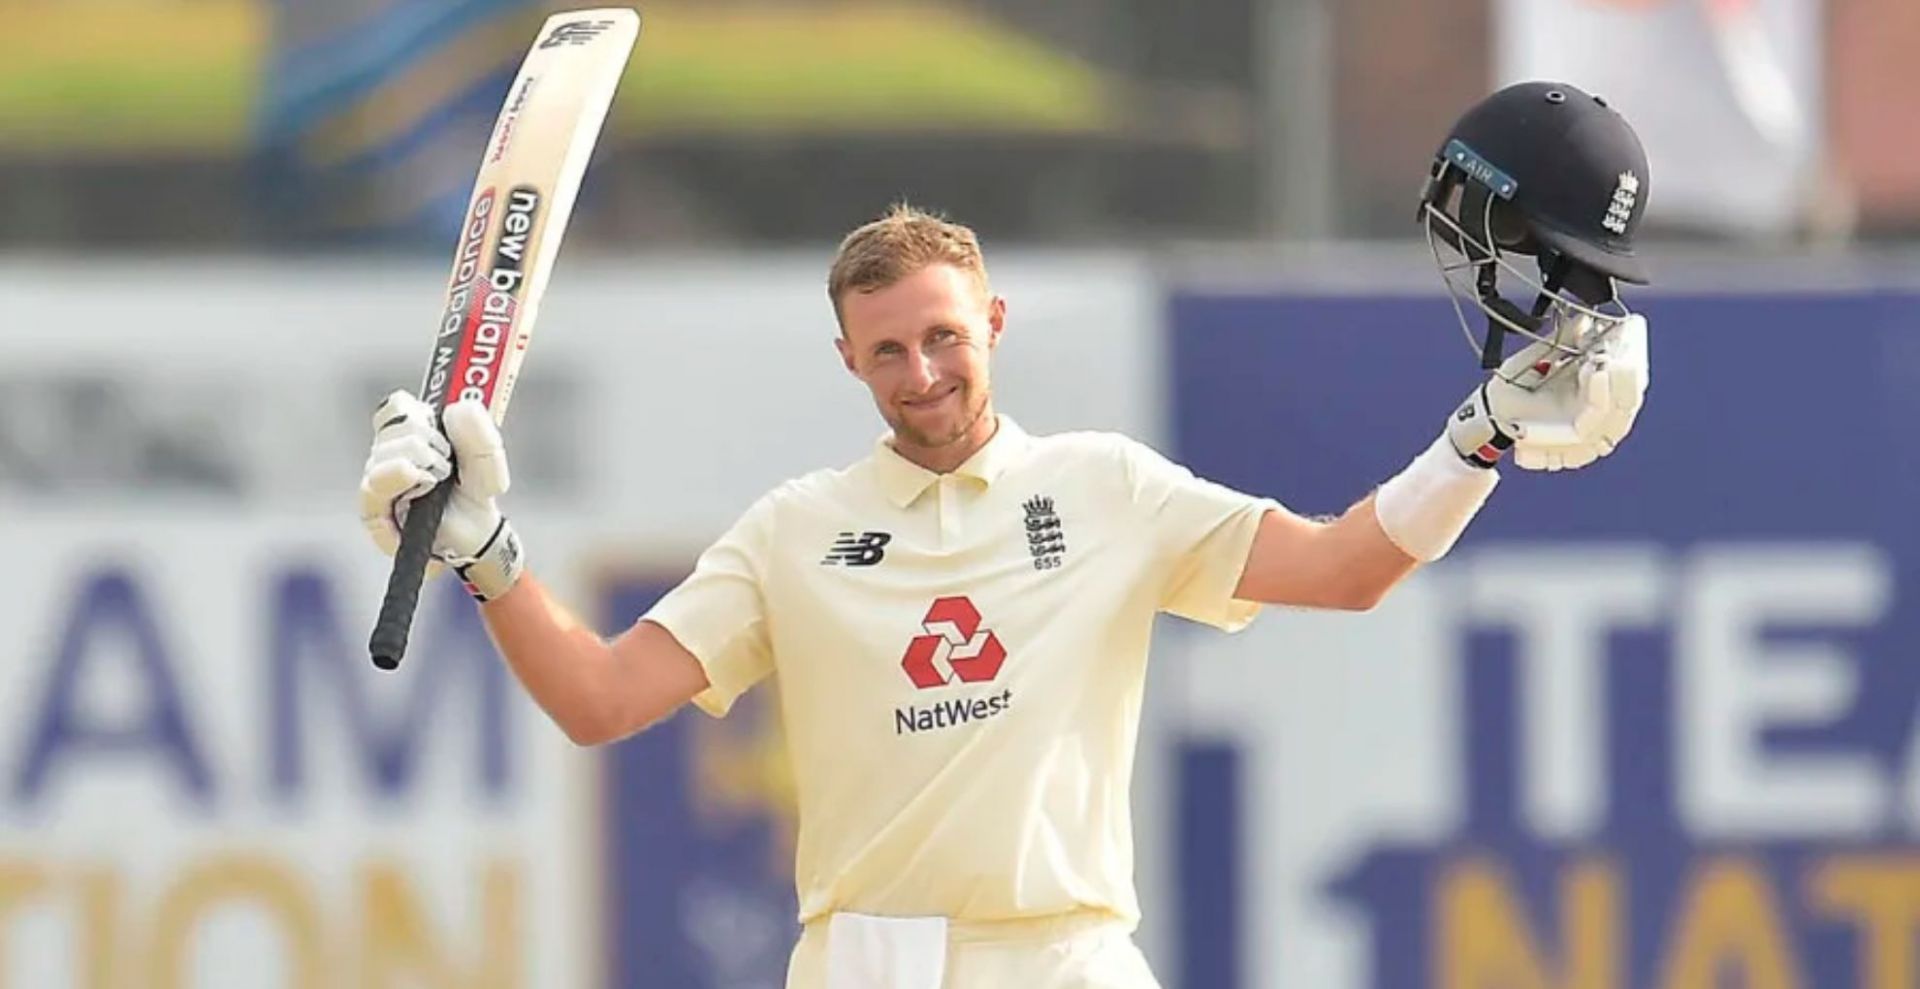 Joe Root scored a double century in his 100th Test. (Credit: BCCI)